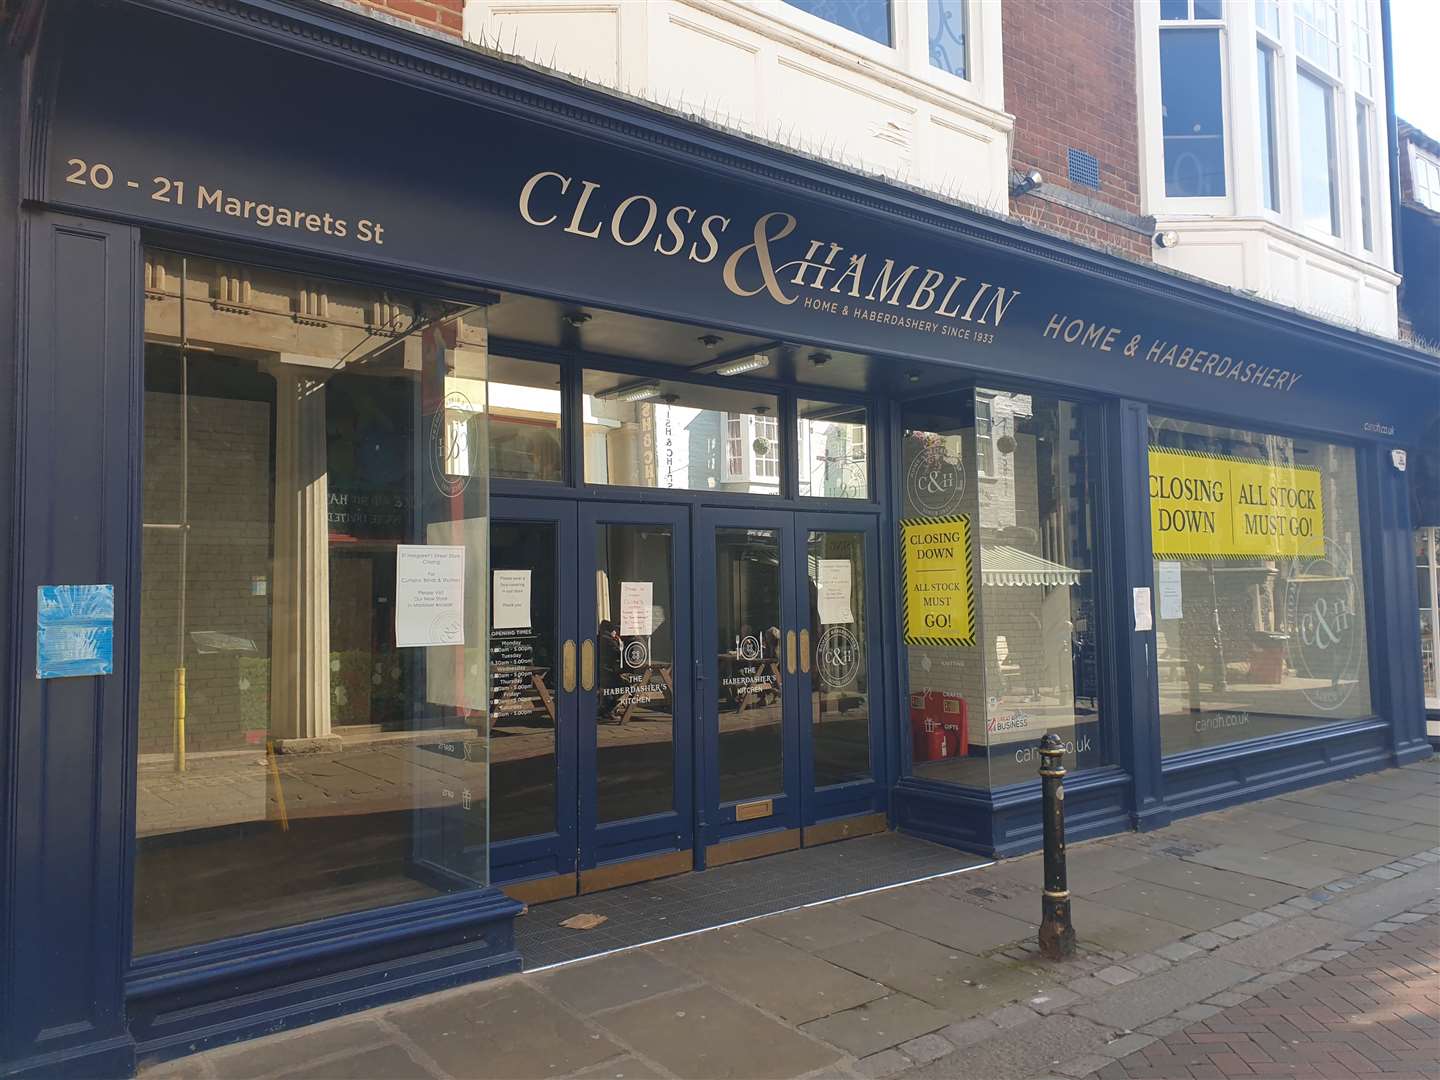 The Closs & Hamblin store in St Margaret's Street, Canterbury, which is becoming a Cosy Club restaurant